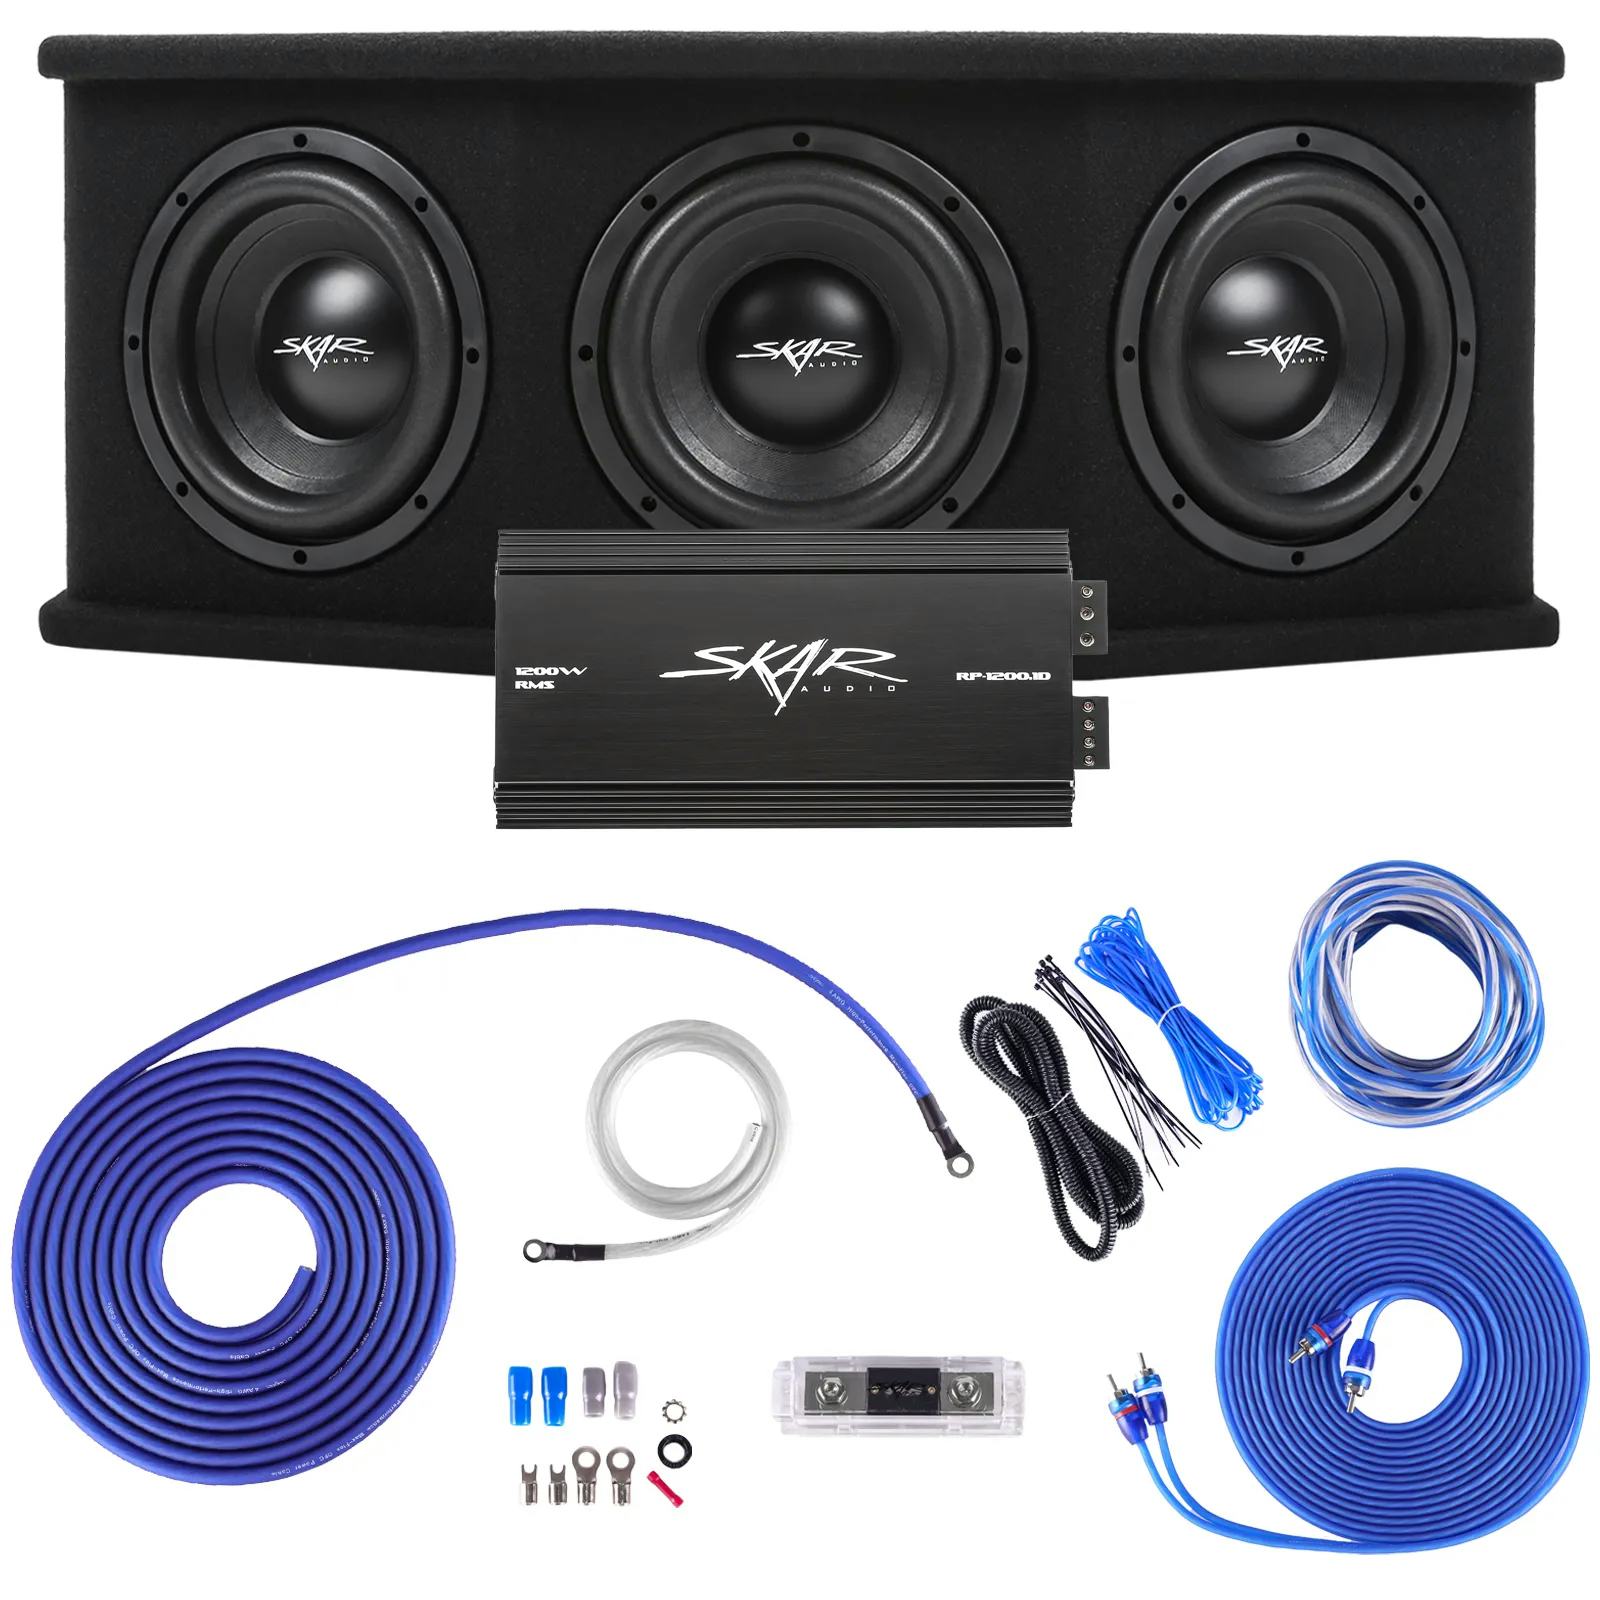 Triple 8" 2,100 Watt SDR Series Complete Subwoofer Package with Vented Enclosure and Amplifier #1